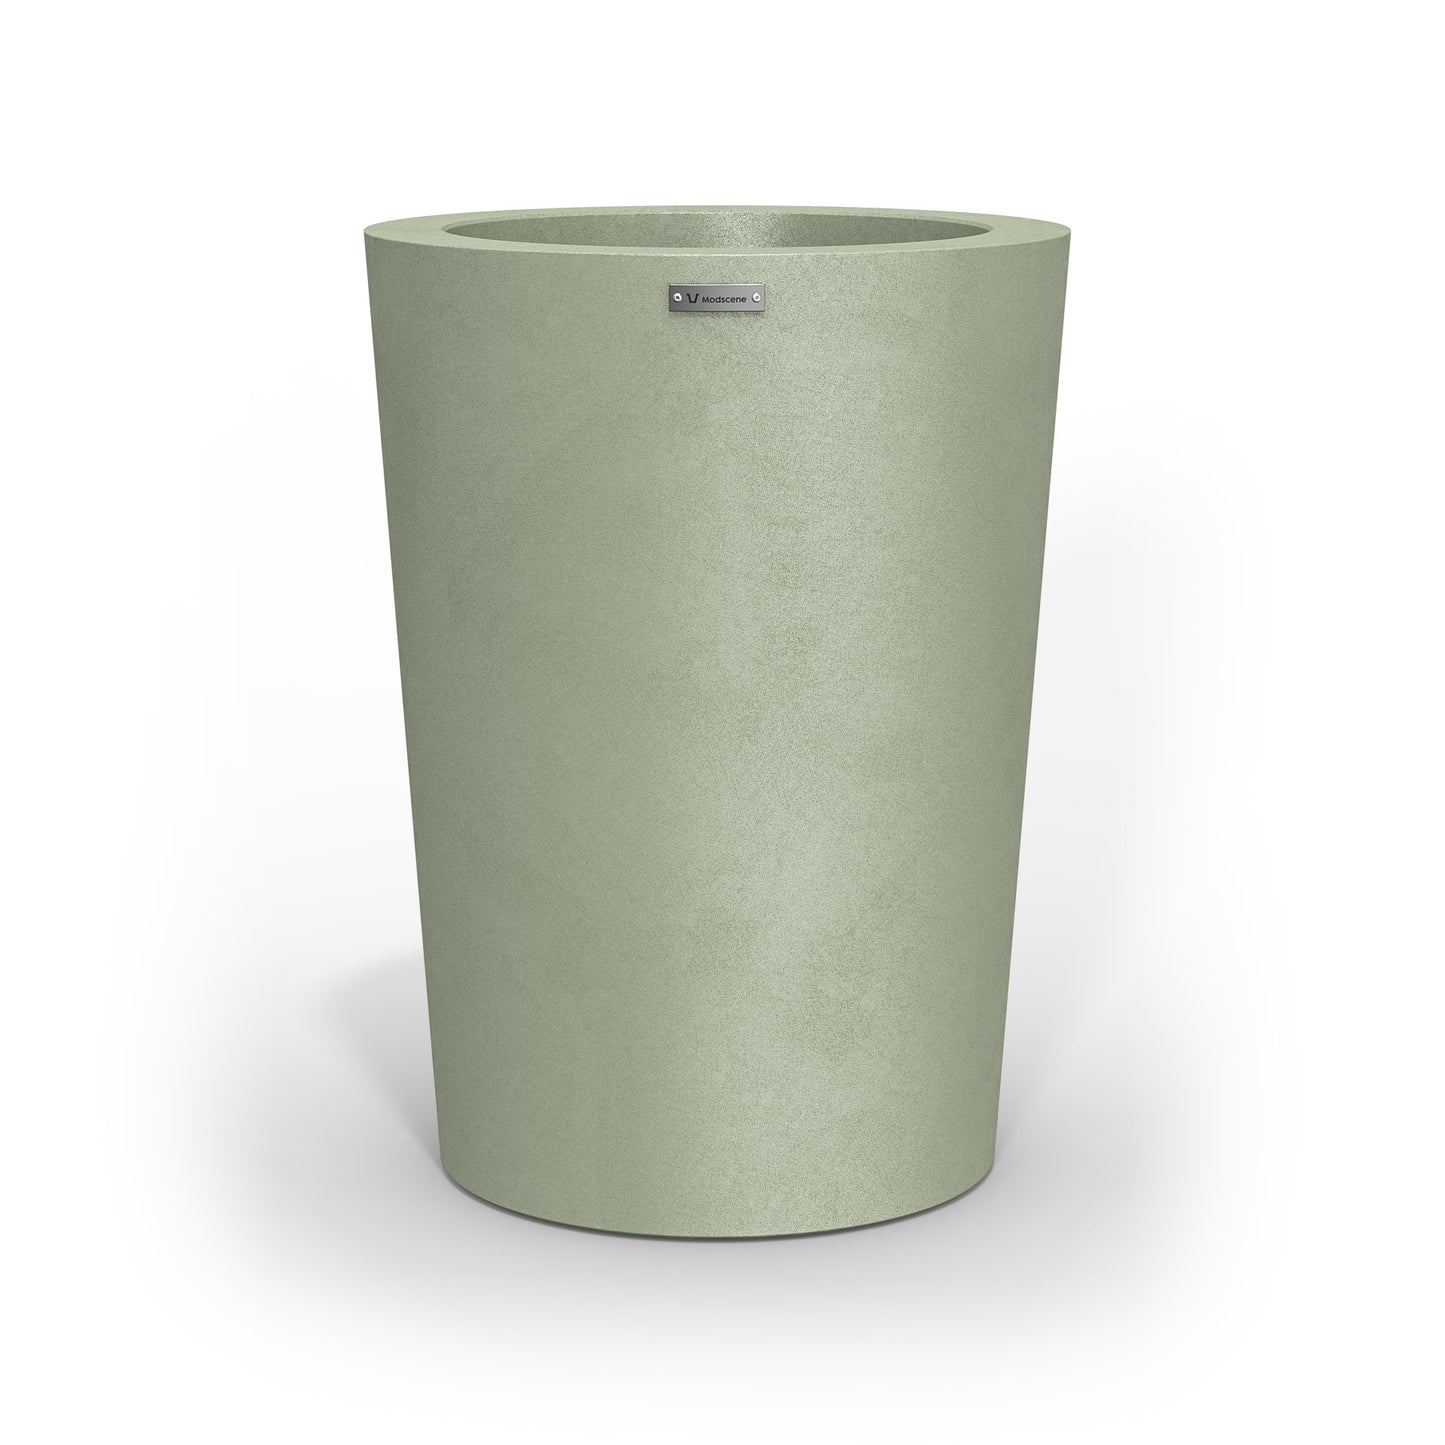 A modern style planter pot in a pastel green colour with a concrete look finish.